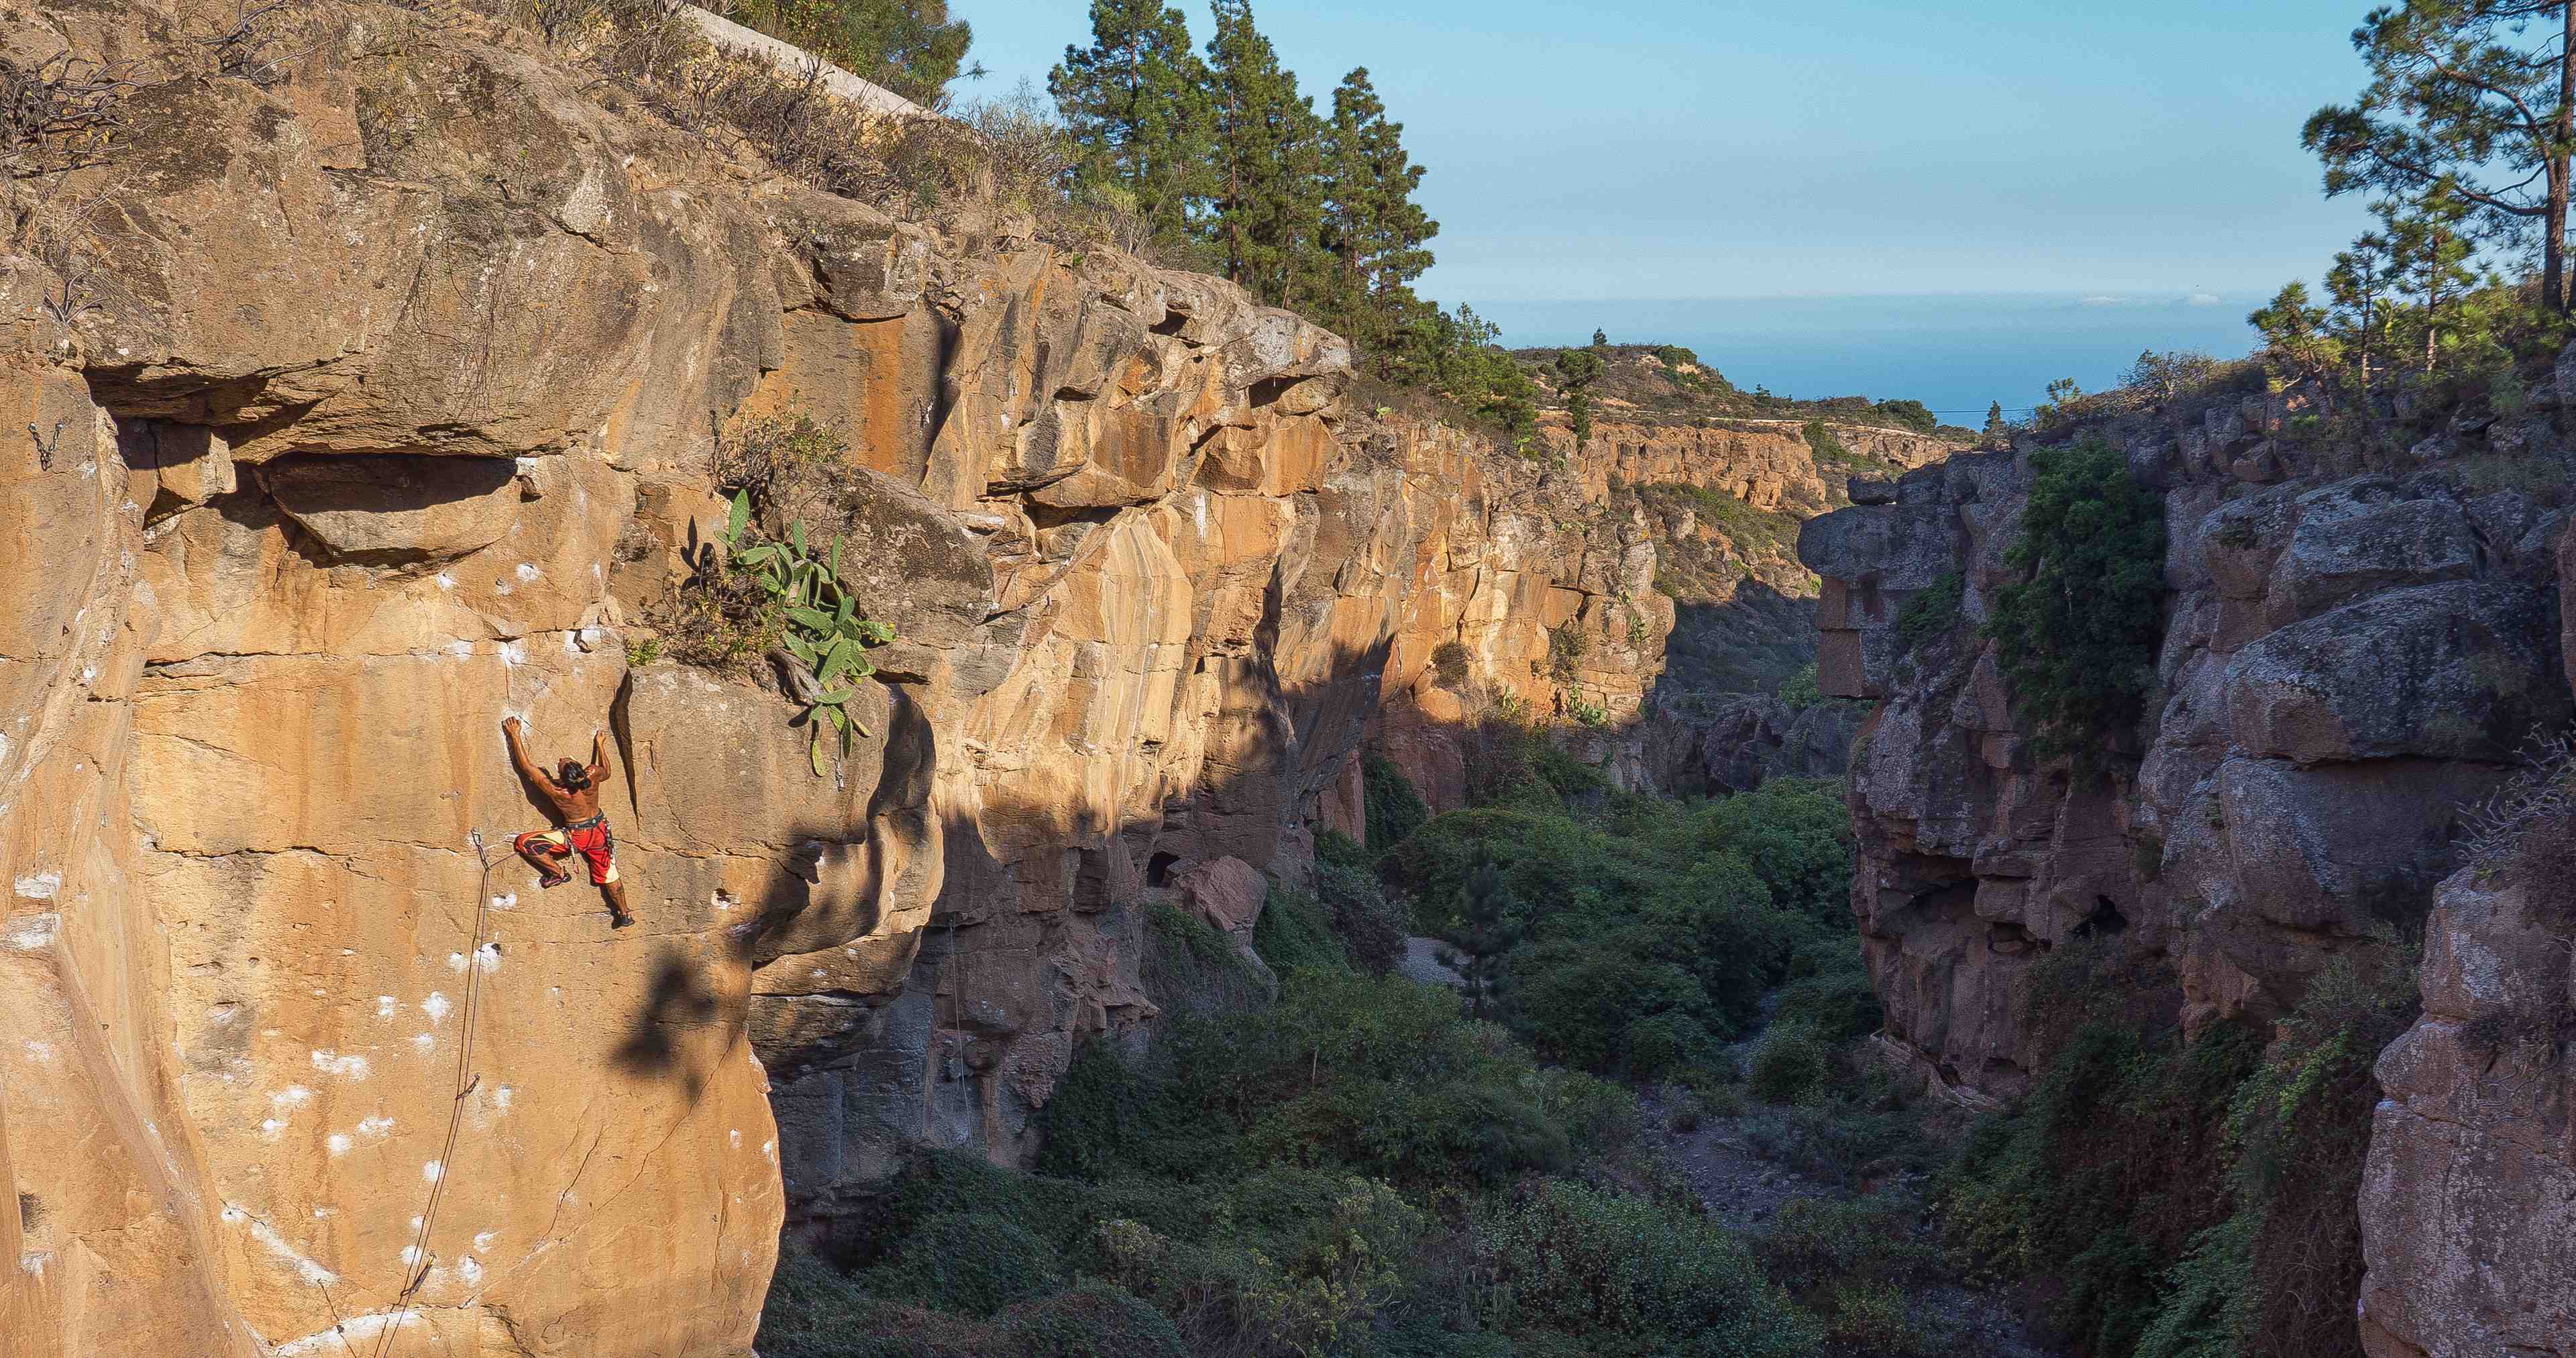 Rock Climbing in Tenerife, Canary Islands: Our Top 5 Spots